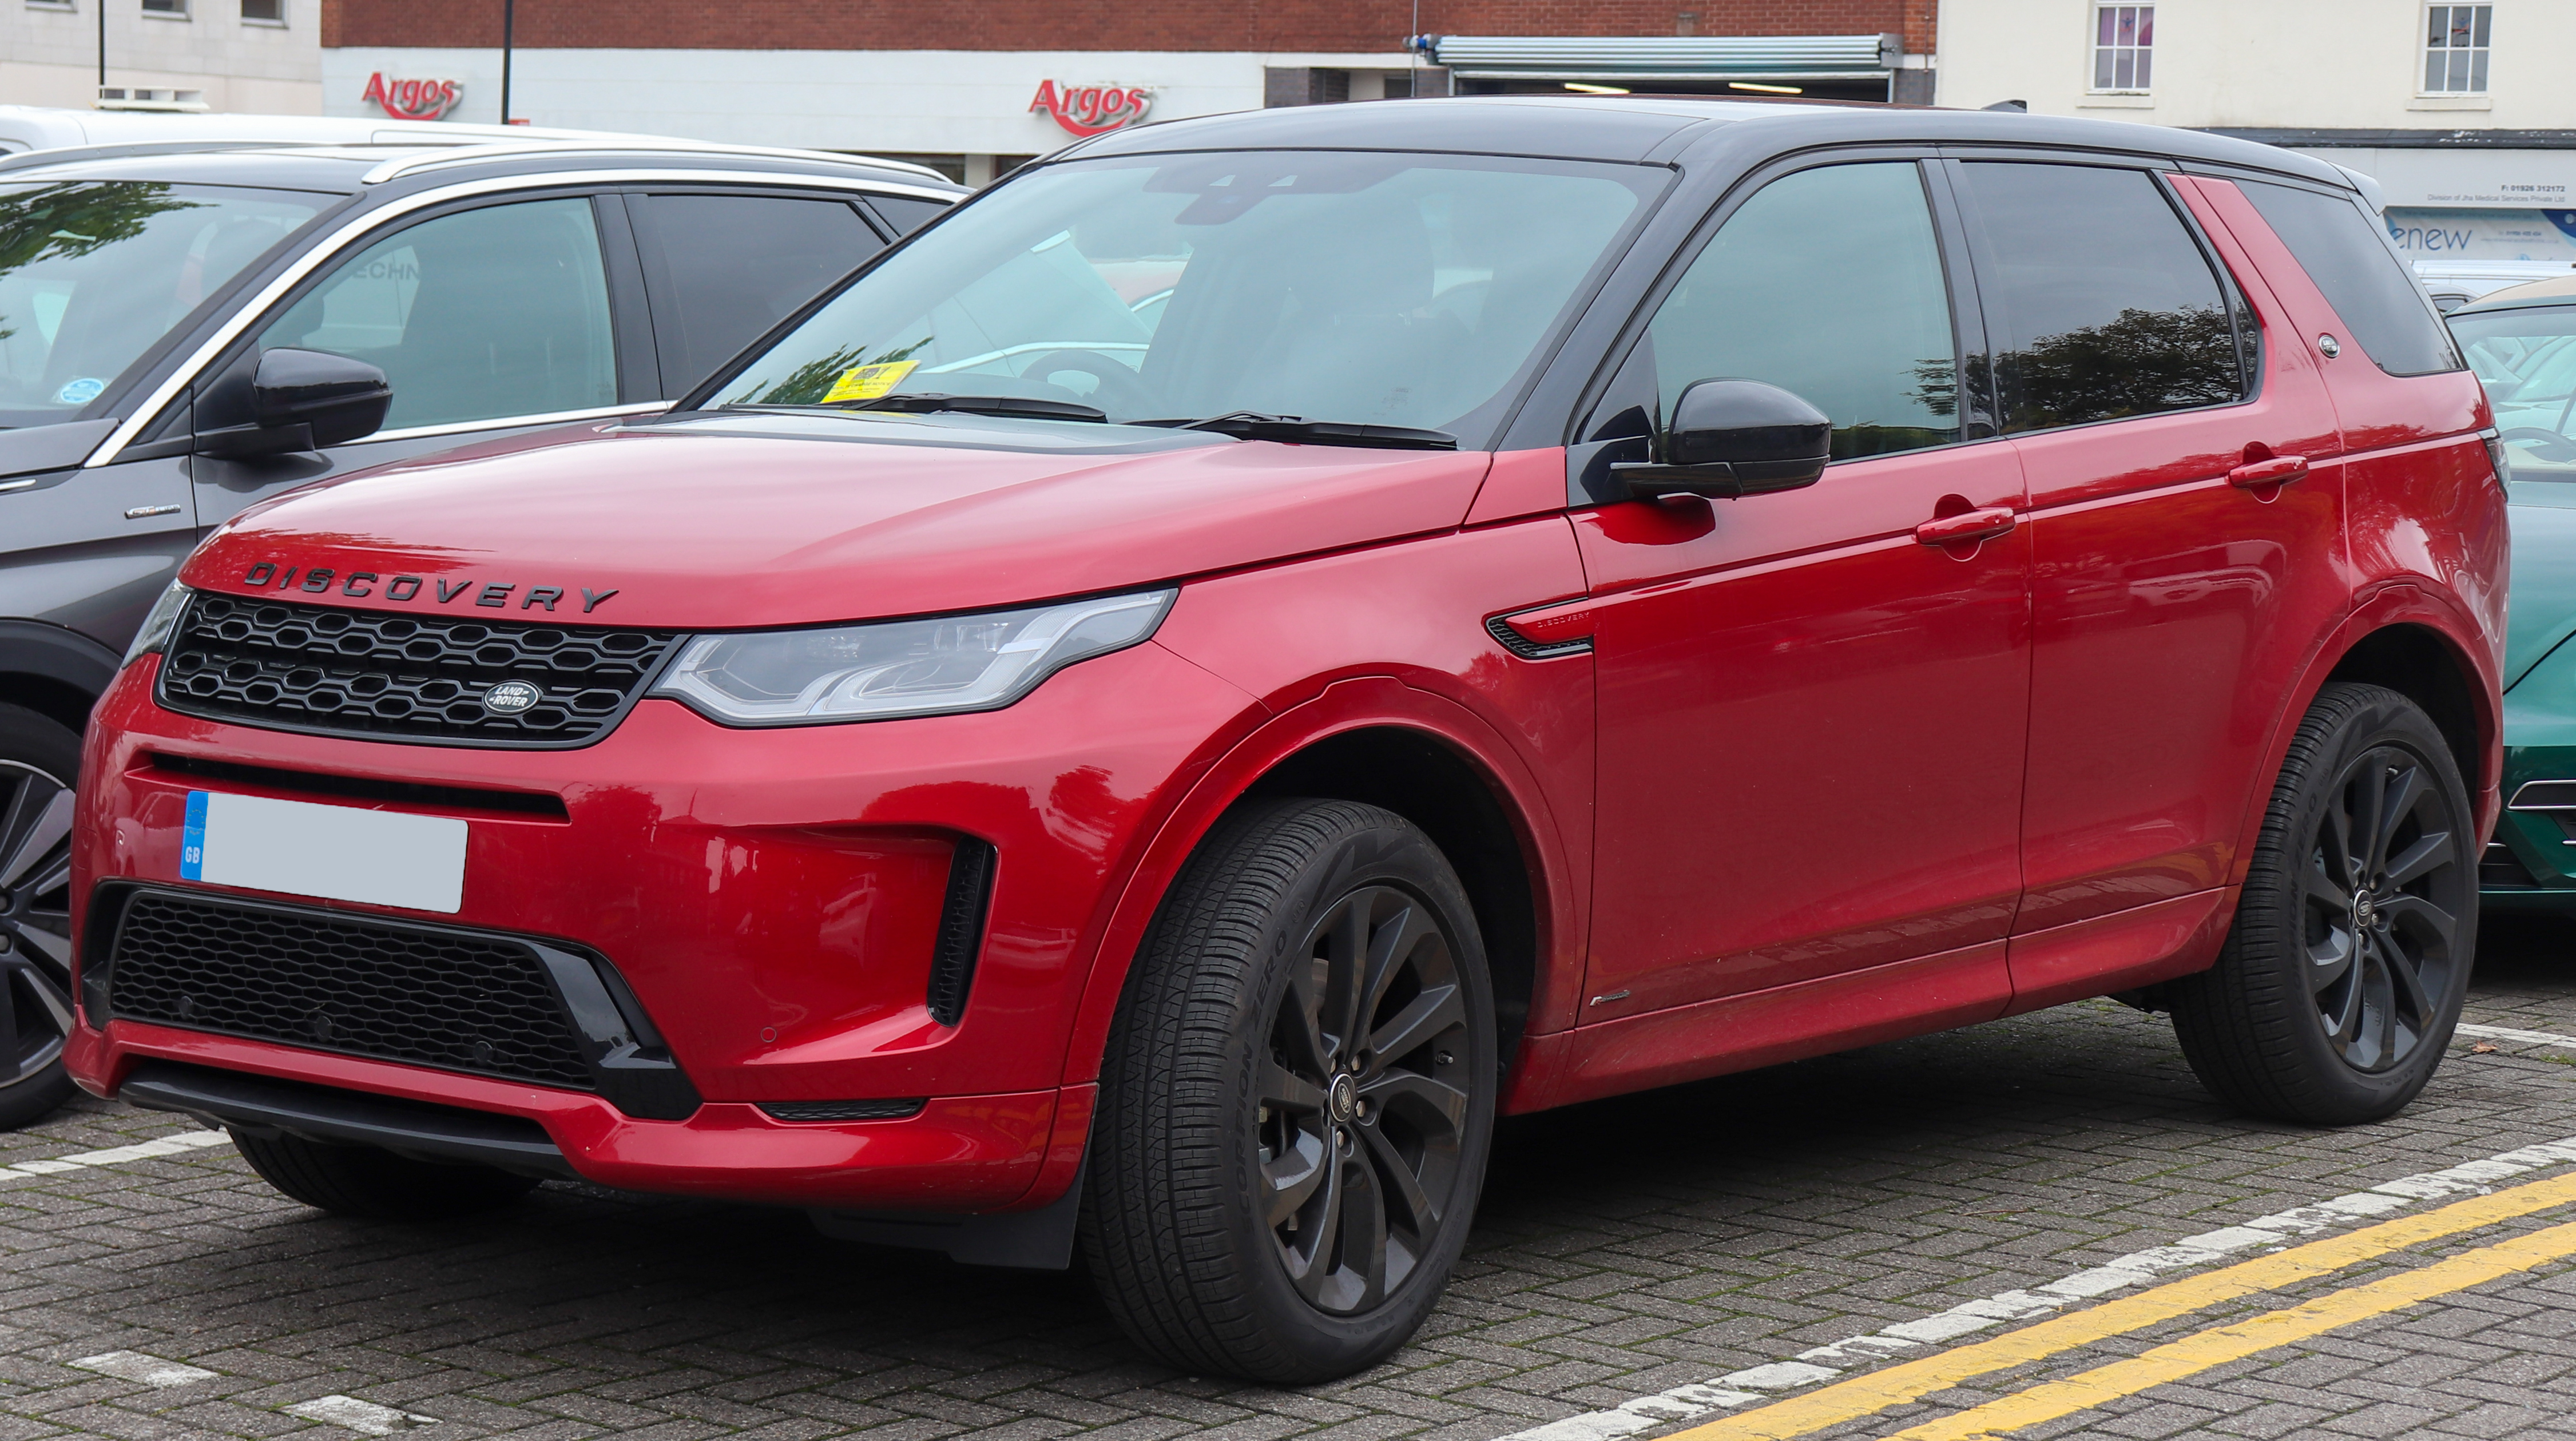 Range Rover Discovery Sport On Road Price  : Choose From Four Models And Two Distinct Body Styles, Each Offering Unique Personality And Additional Jaguar Land Rover Limited: